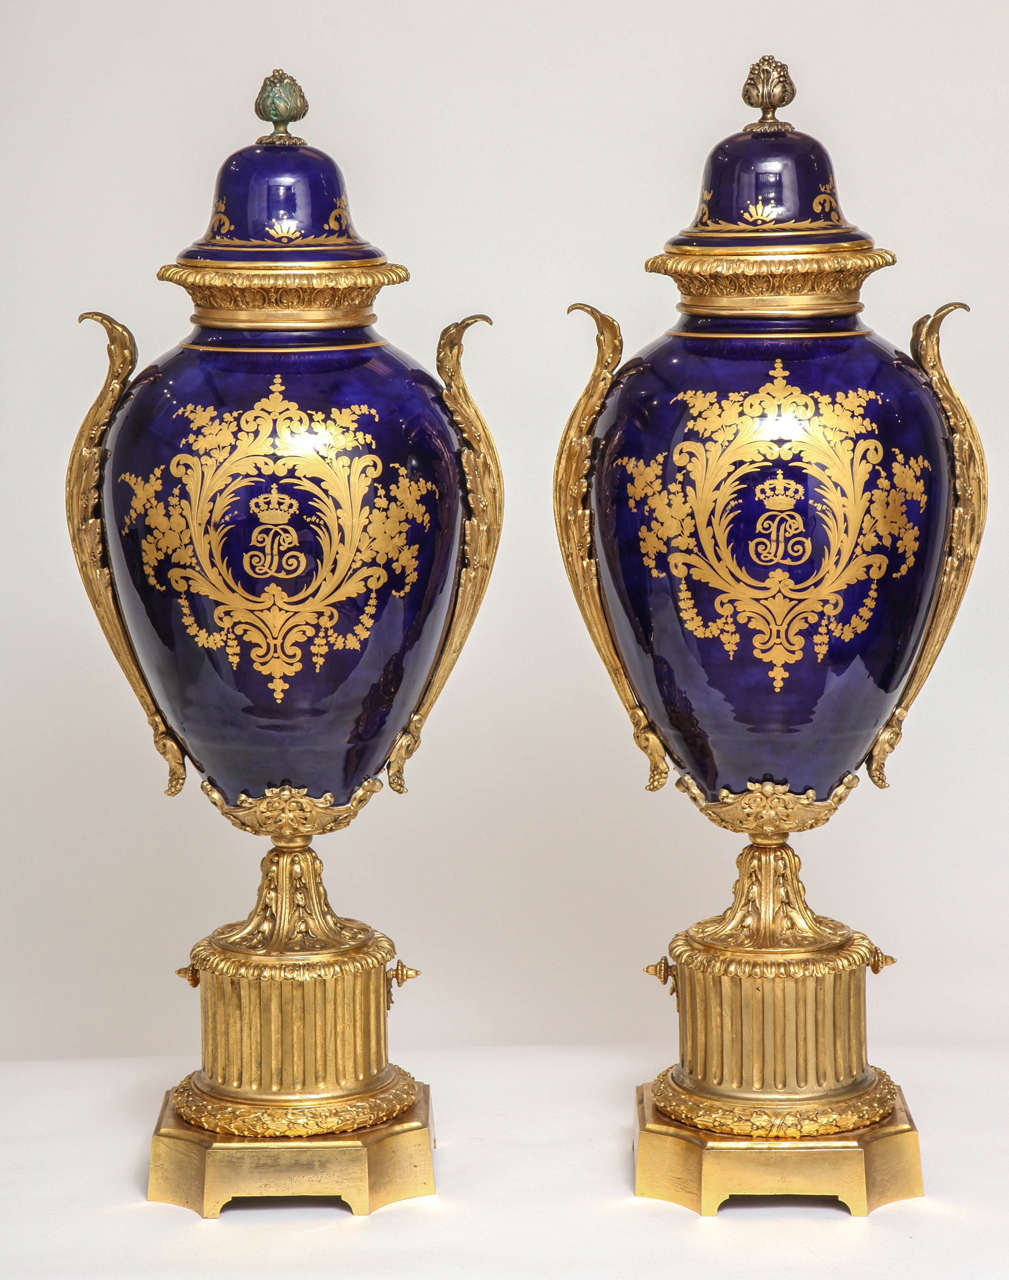 19th Century Massive Pair of Fine Antique French Ormolu-Mounted Sèvres Style Porcelain Vases For Sale